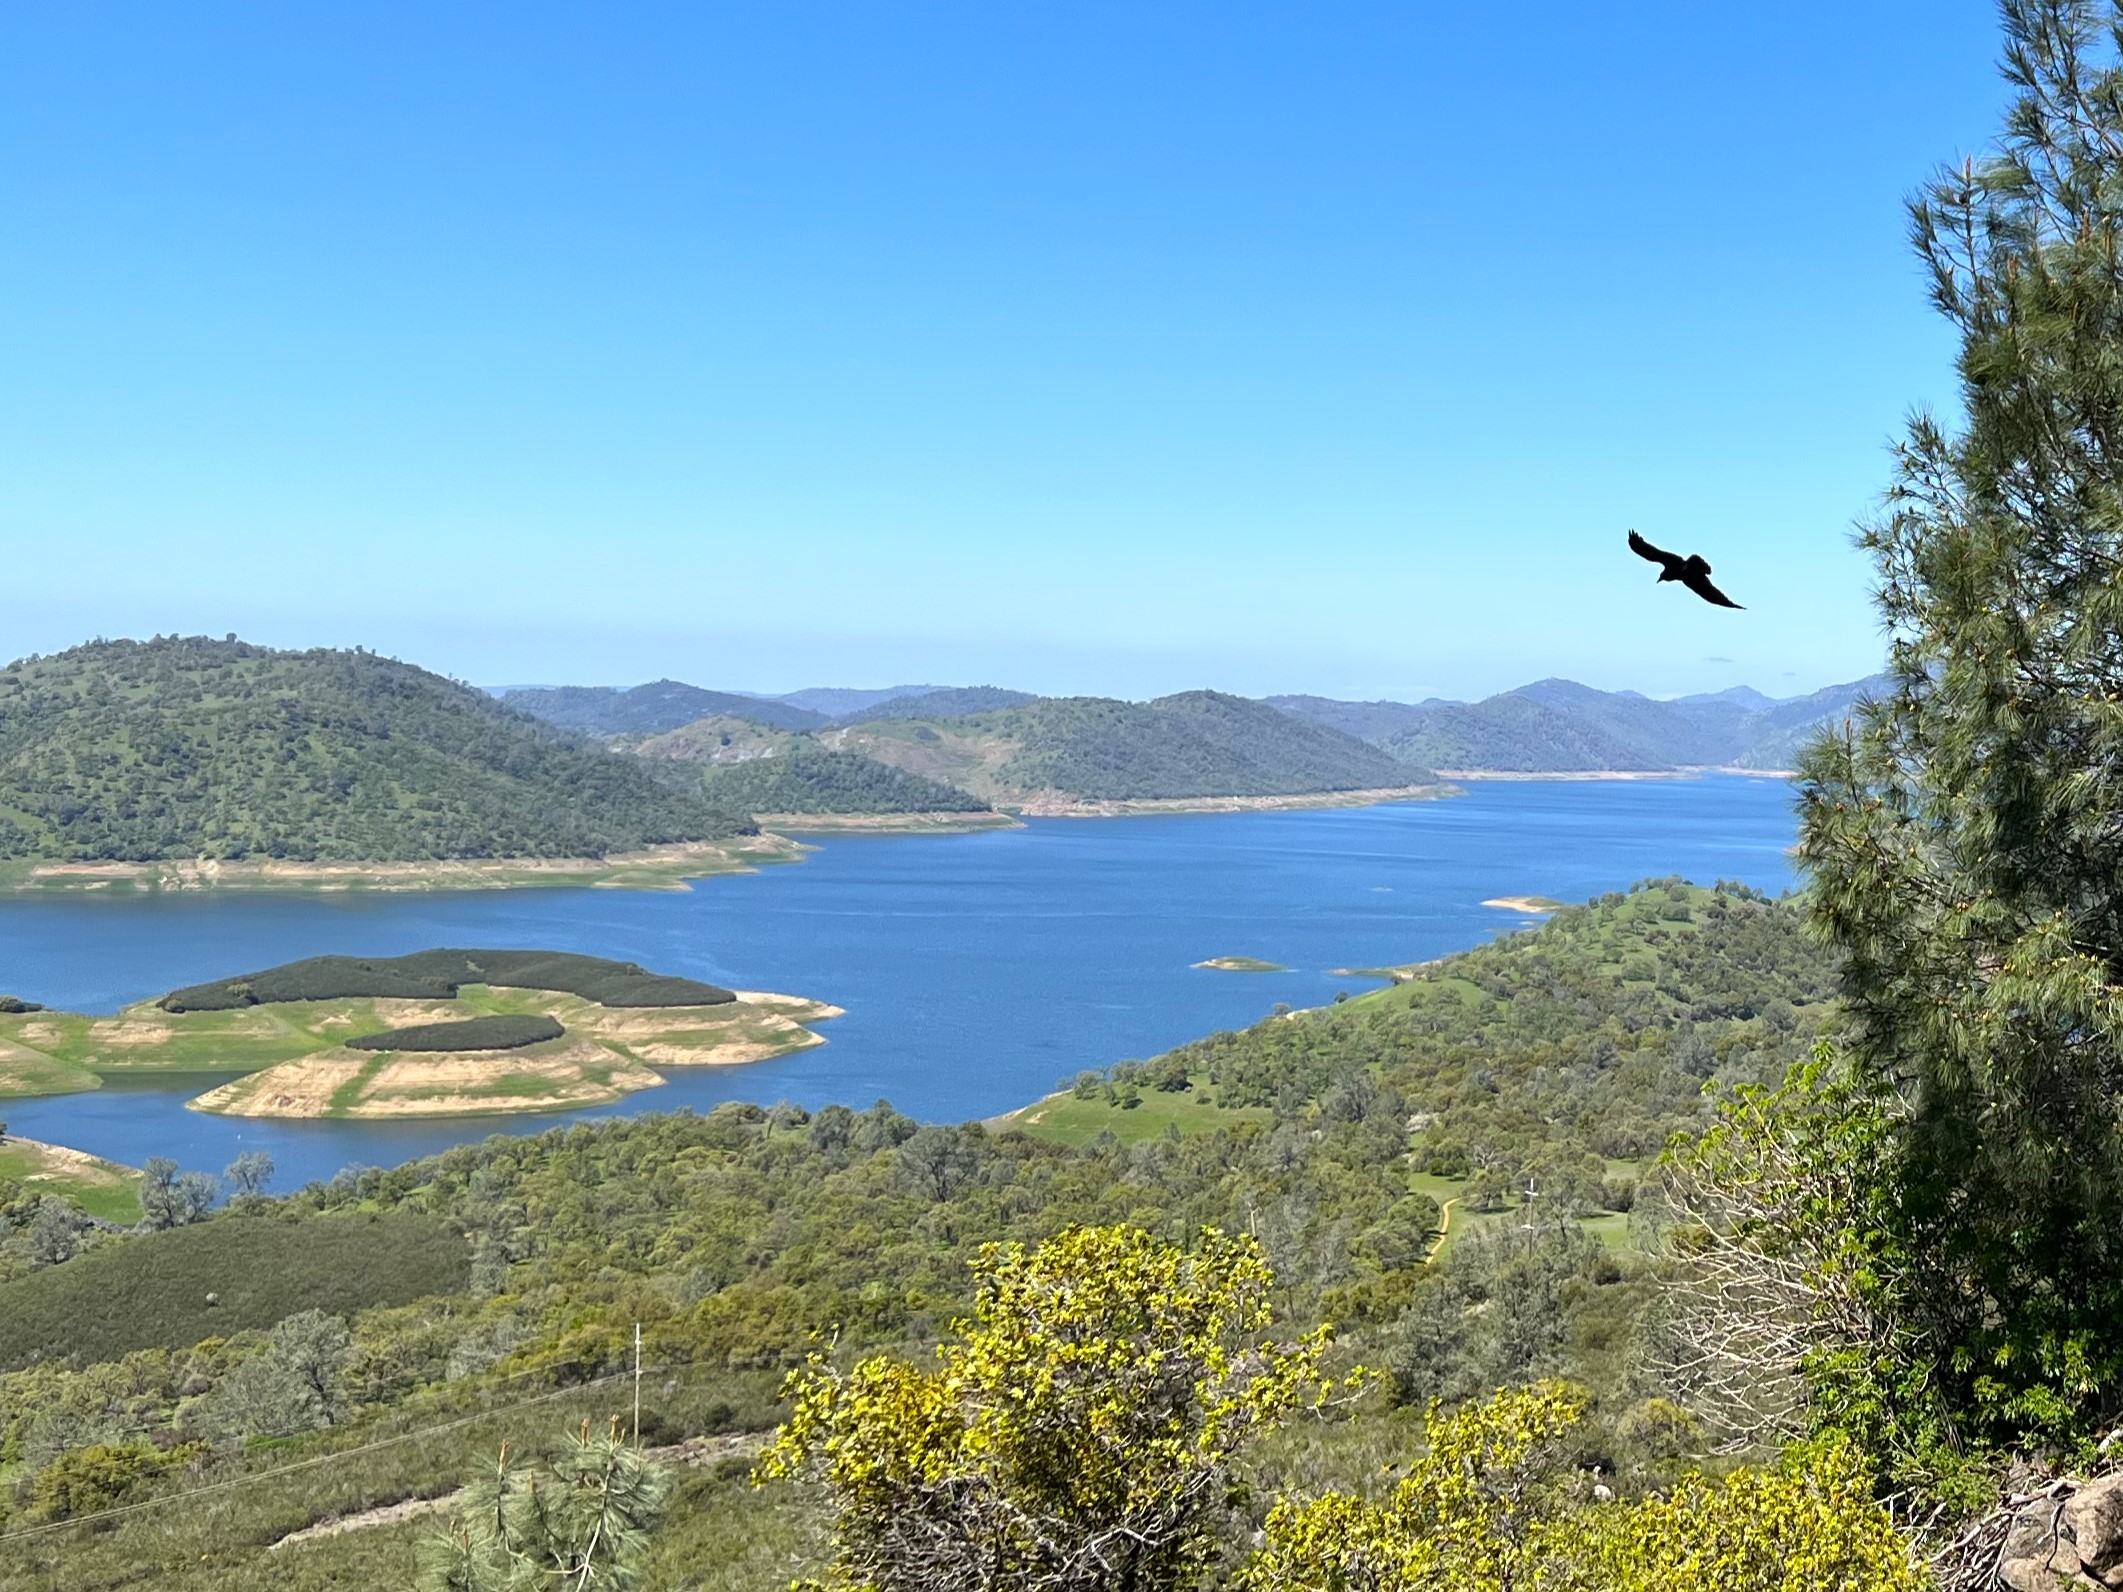 A view looking down on new melones with a bird soaring above.